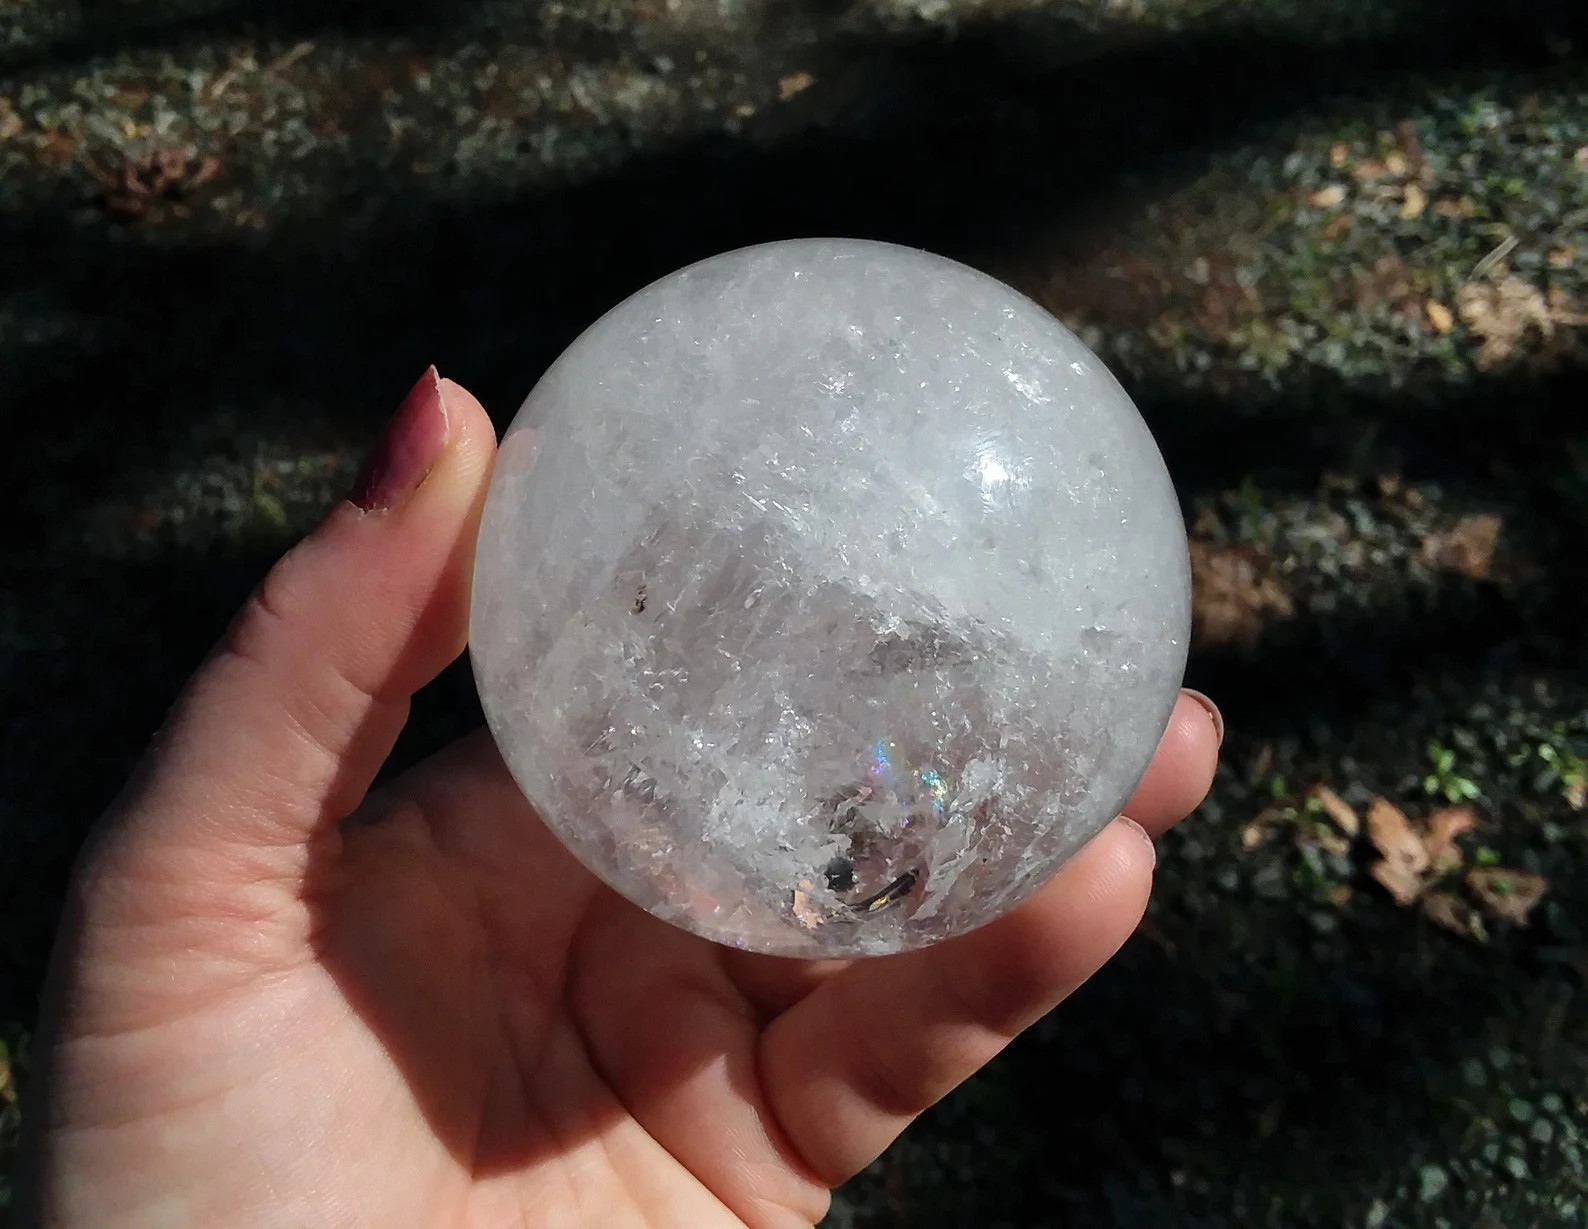 Clear Crystal Quartz sphere with rainbows 2.82" 1lb+ - Click Image to Close